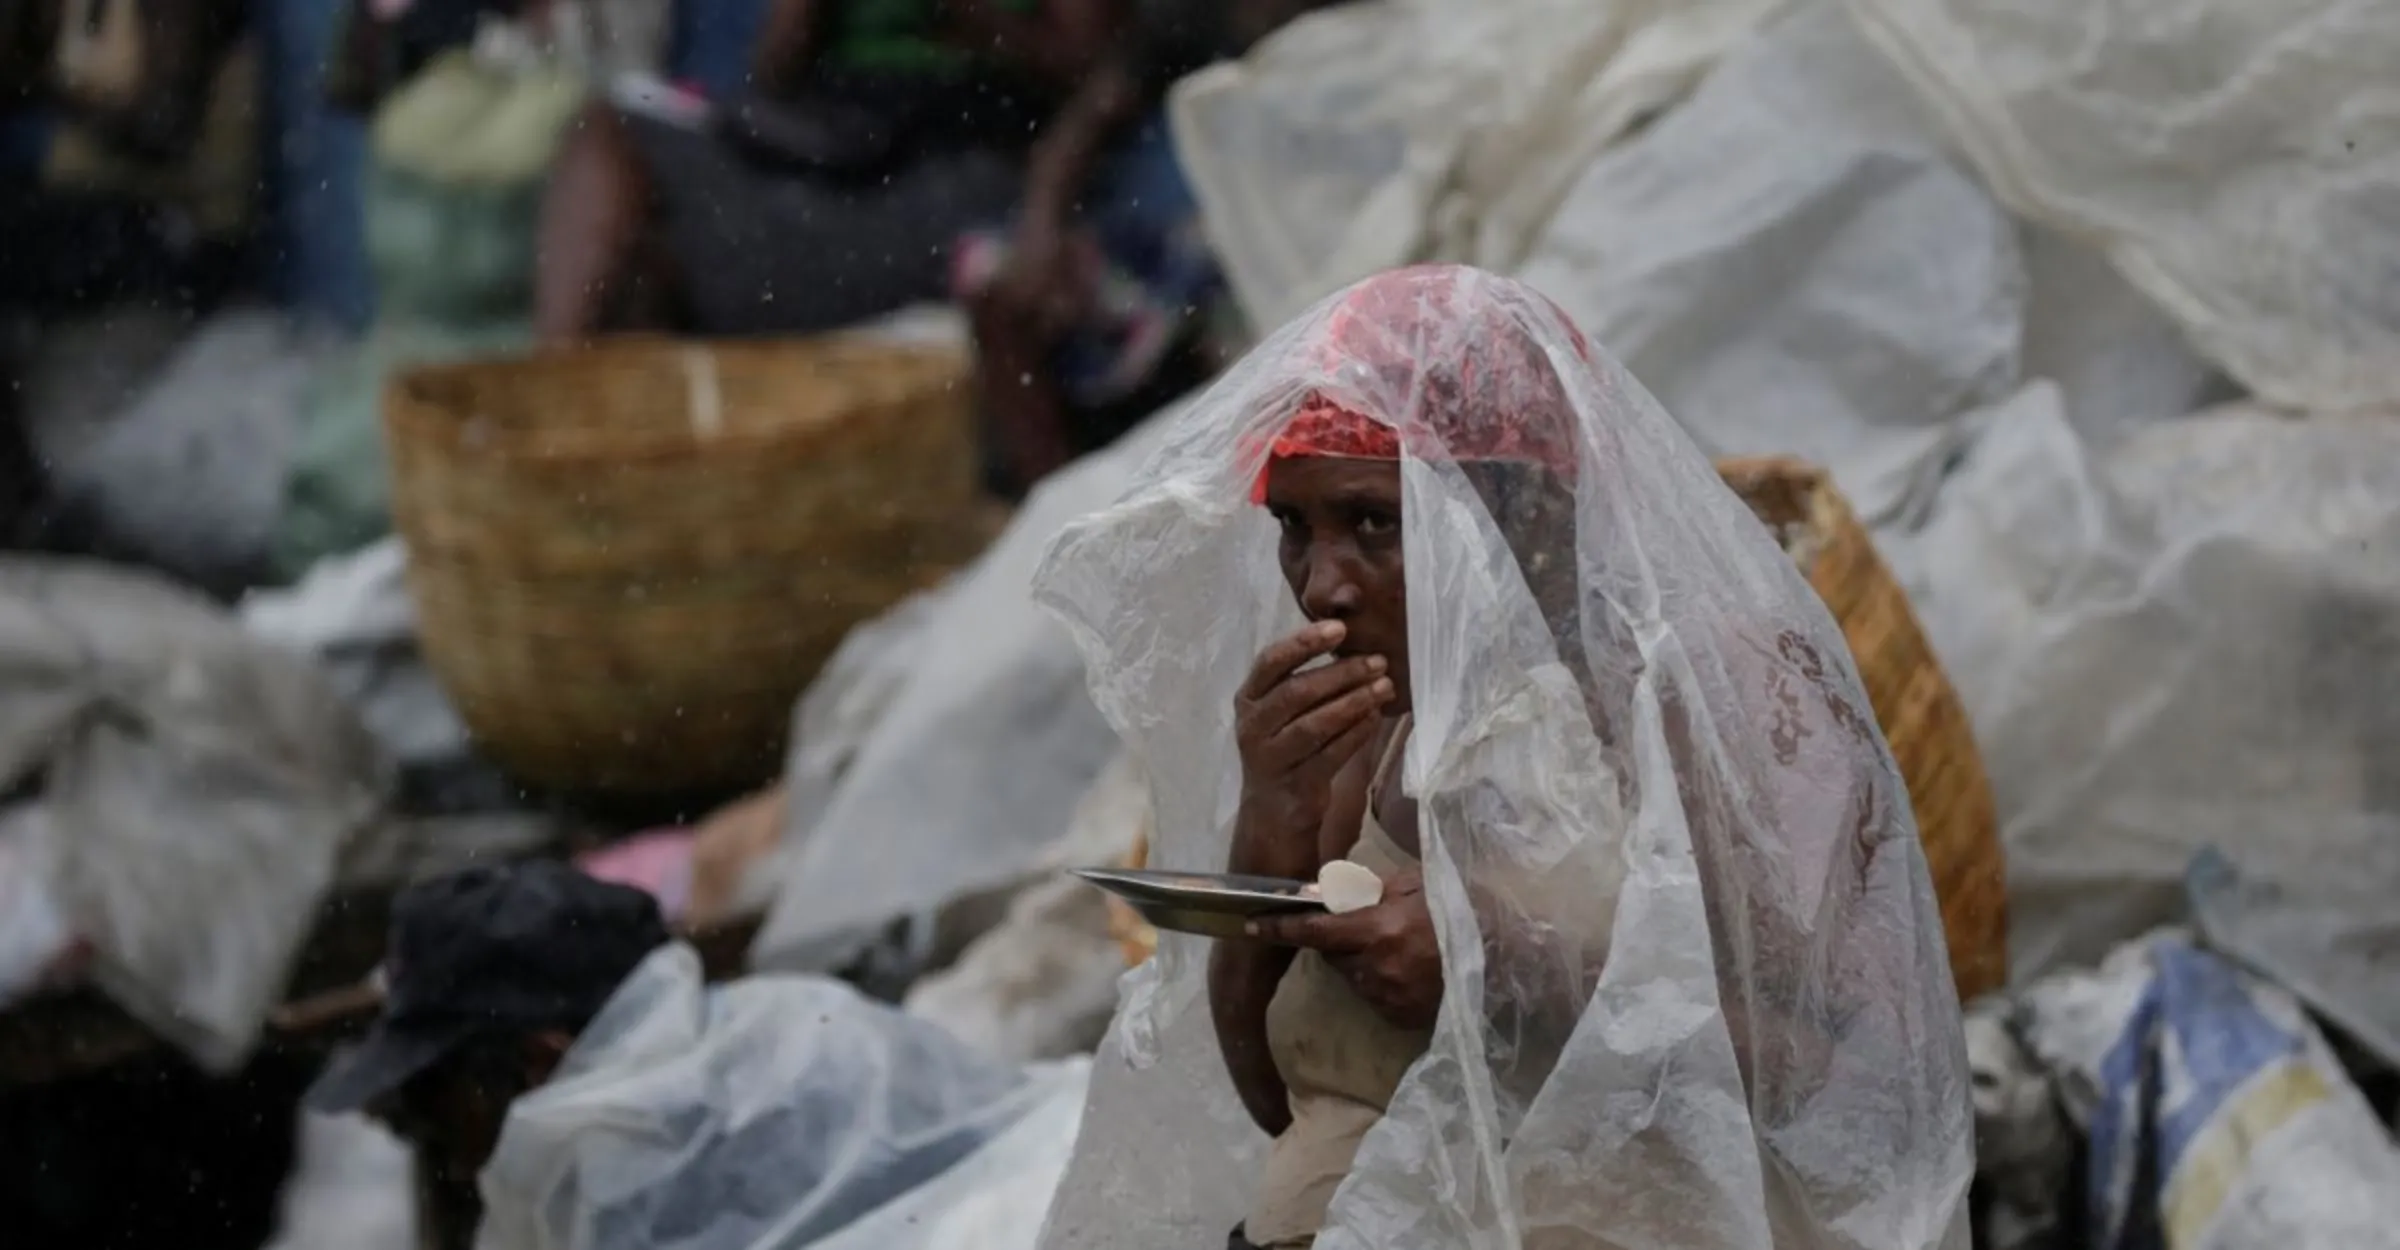 A woman protects herself from rain brought by Hurricane Irma as she eats lunch in a street of Cap-Haitien, Haiti, September 7, 2017. REUTERS/Andres Martinez Casares